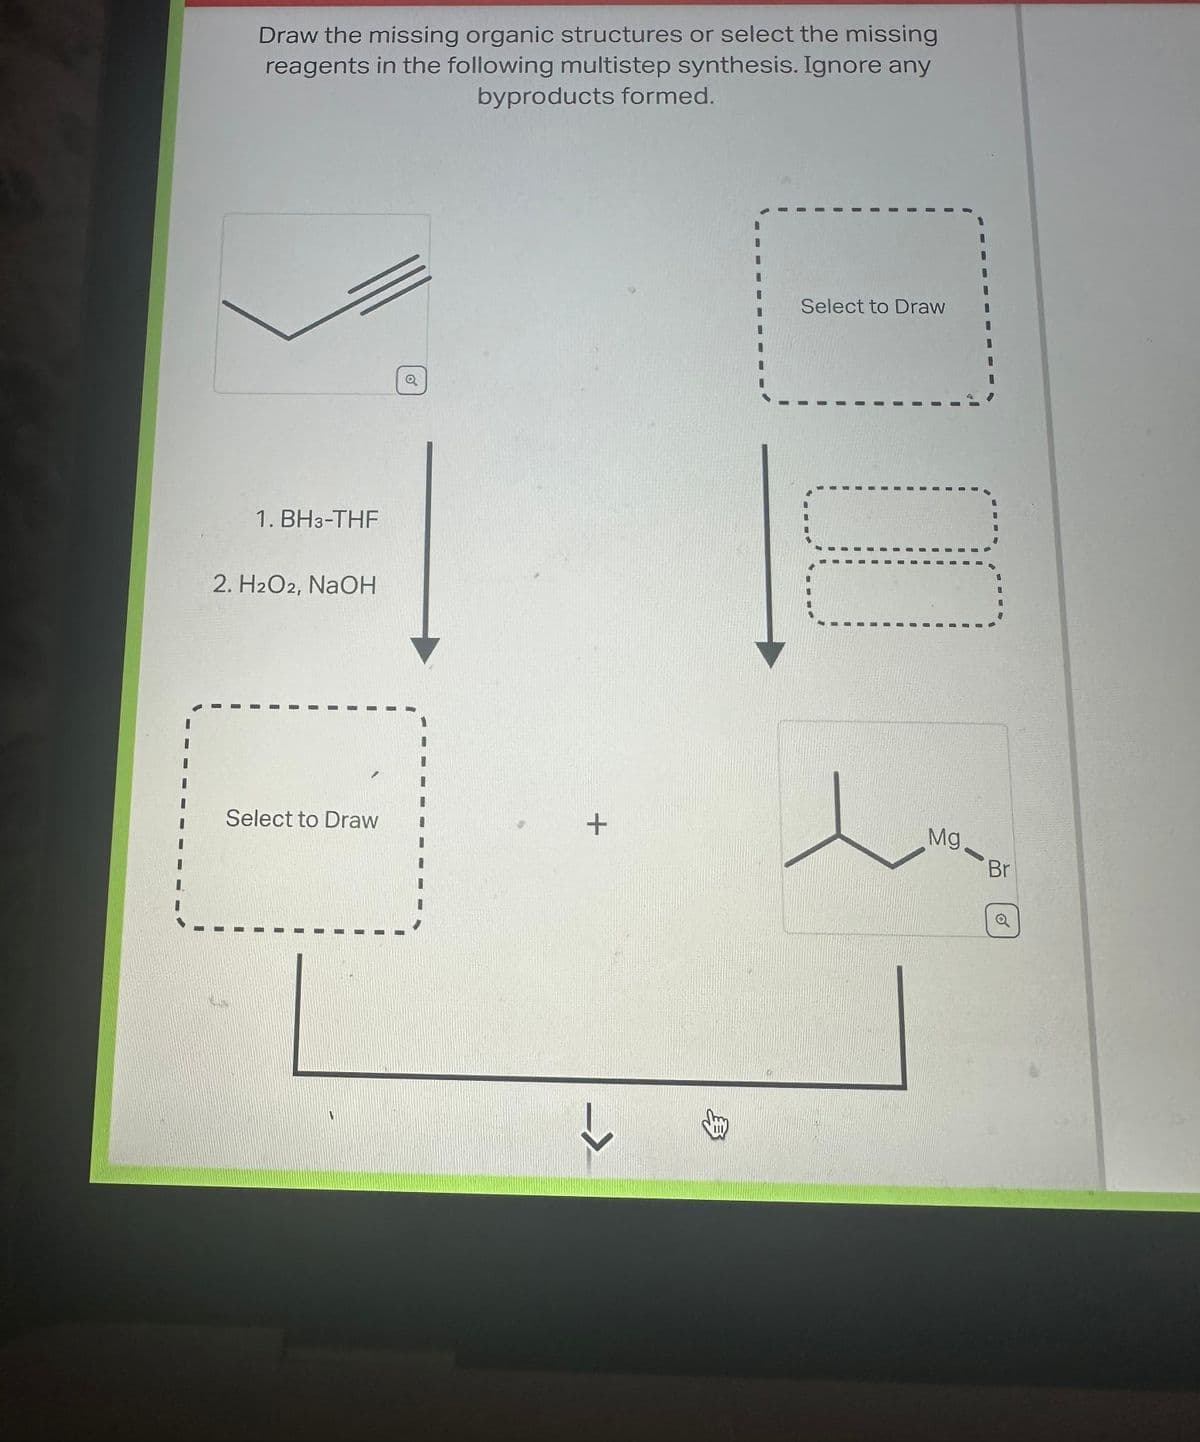 Draw the missing organic structures or select the missing
reagents in the following multistep synthesis. Ignore any
byproducts formed.
1. BH3-THF
2. H2O2, NaOH
Select to Draw
Q
+
3
Select to Draw
Mg.
-
Br